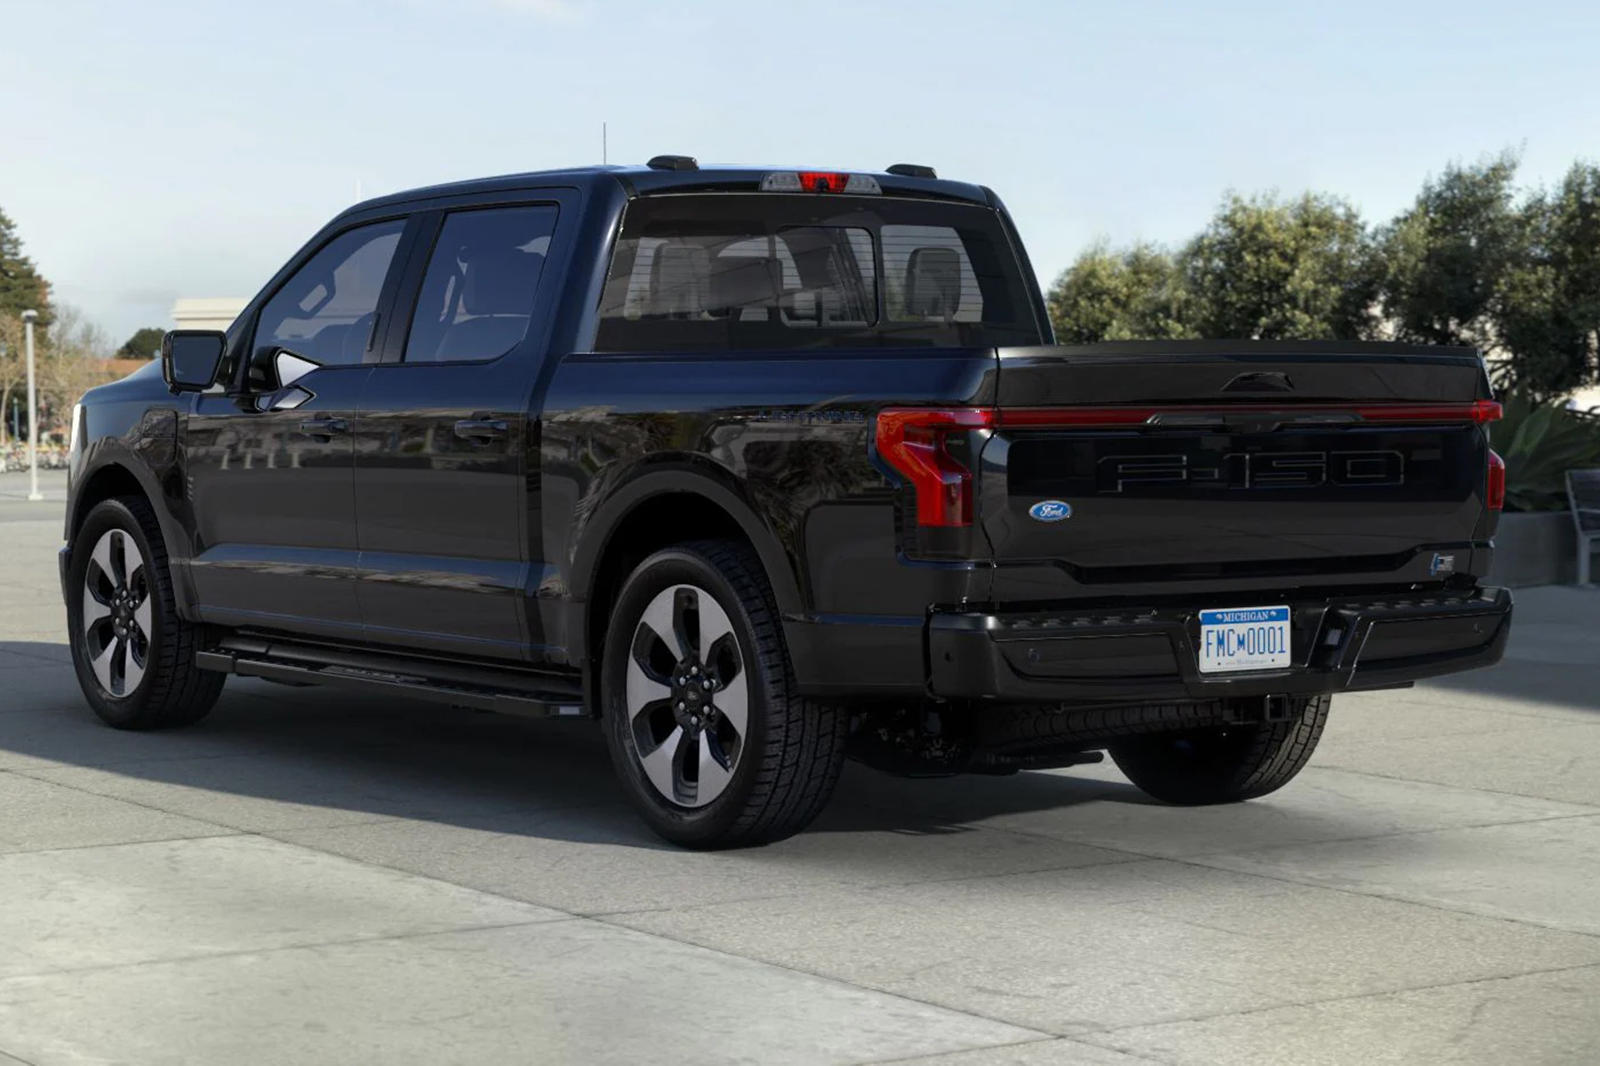 Ford F-150 Lightning ⚡️Complete Photo + Wallpaper Archive for the New F-150 Lightning⚡️ 8C10B52F-8828-46A2-B84C-6665098F9524